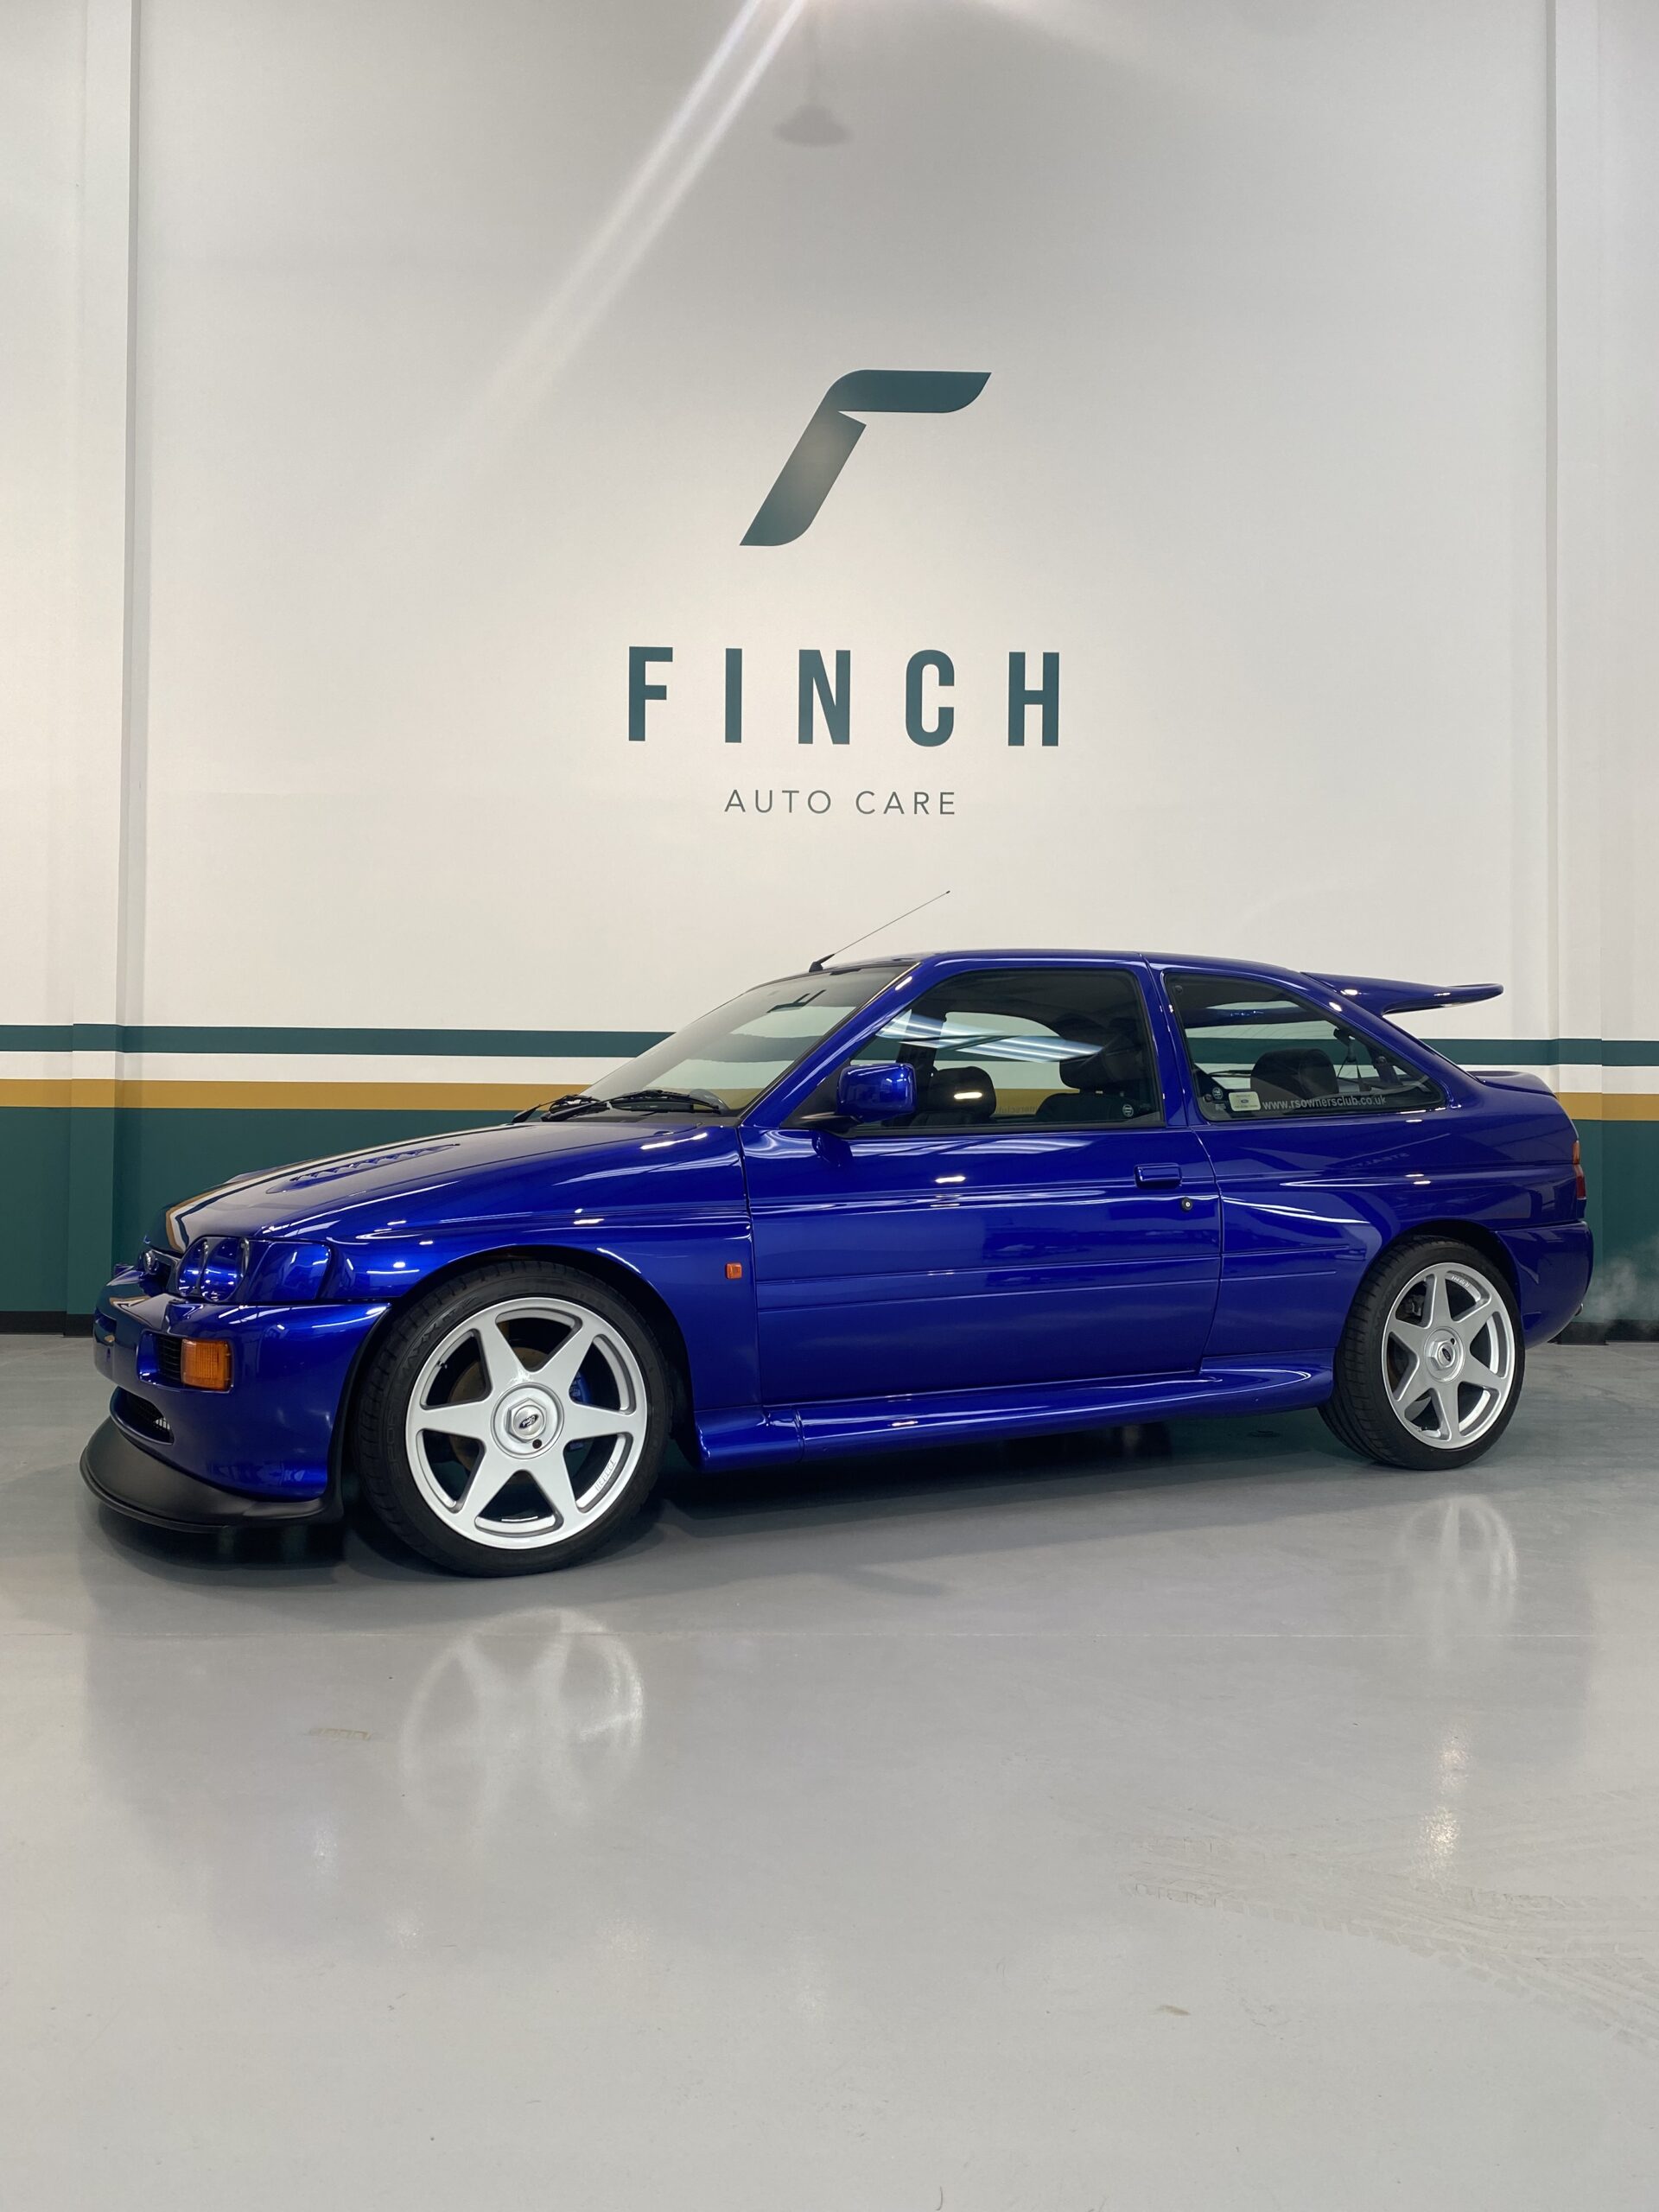 A blue sports car parked inside a detailing shop with the logo "finch auto care" on the wall behind it.